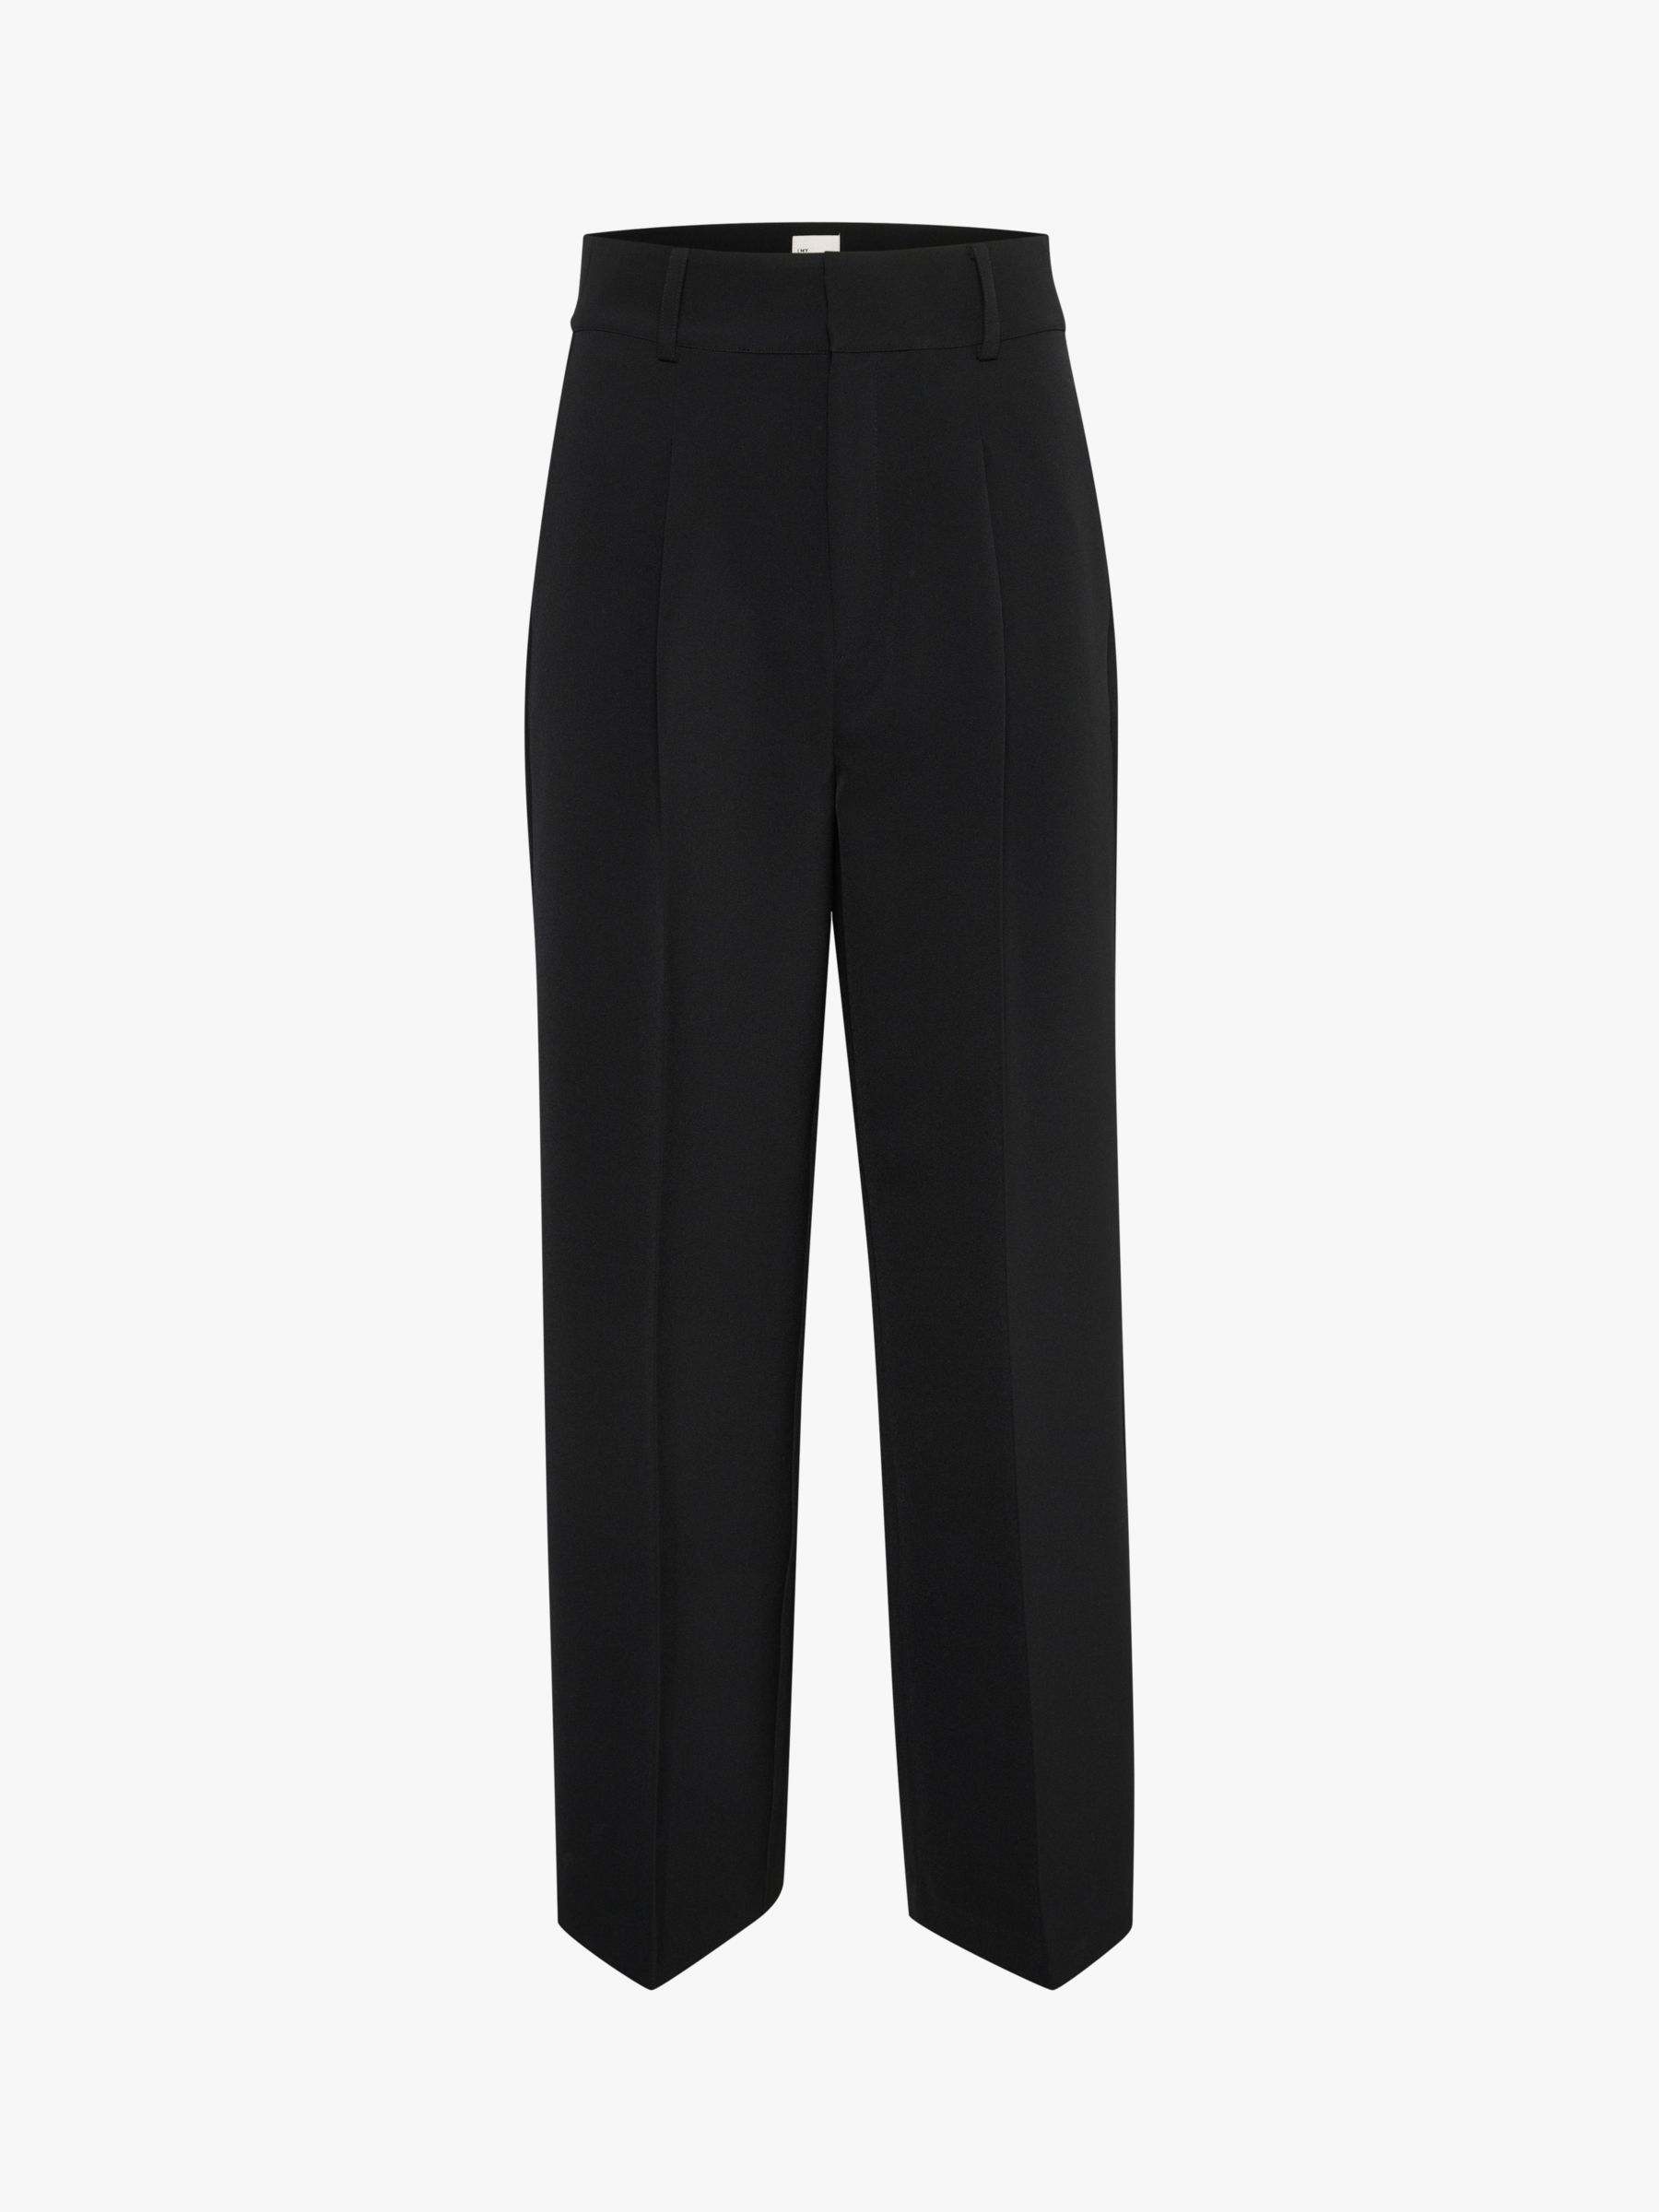 MY ESSENTIAL WARDROBE Tailored Wide Leg Trousers, Black, 16